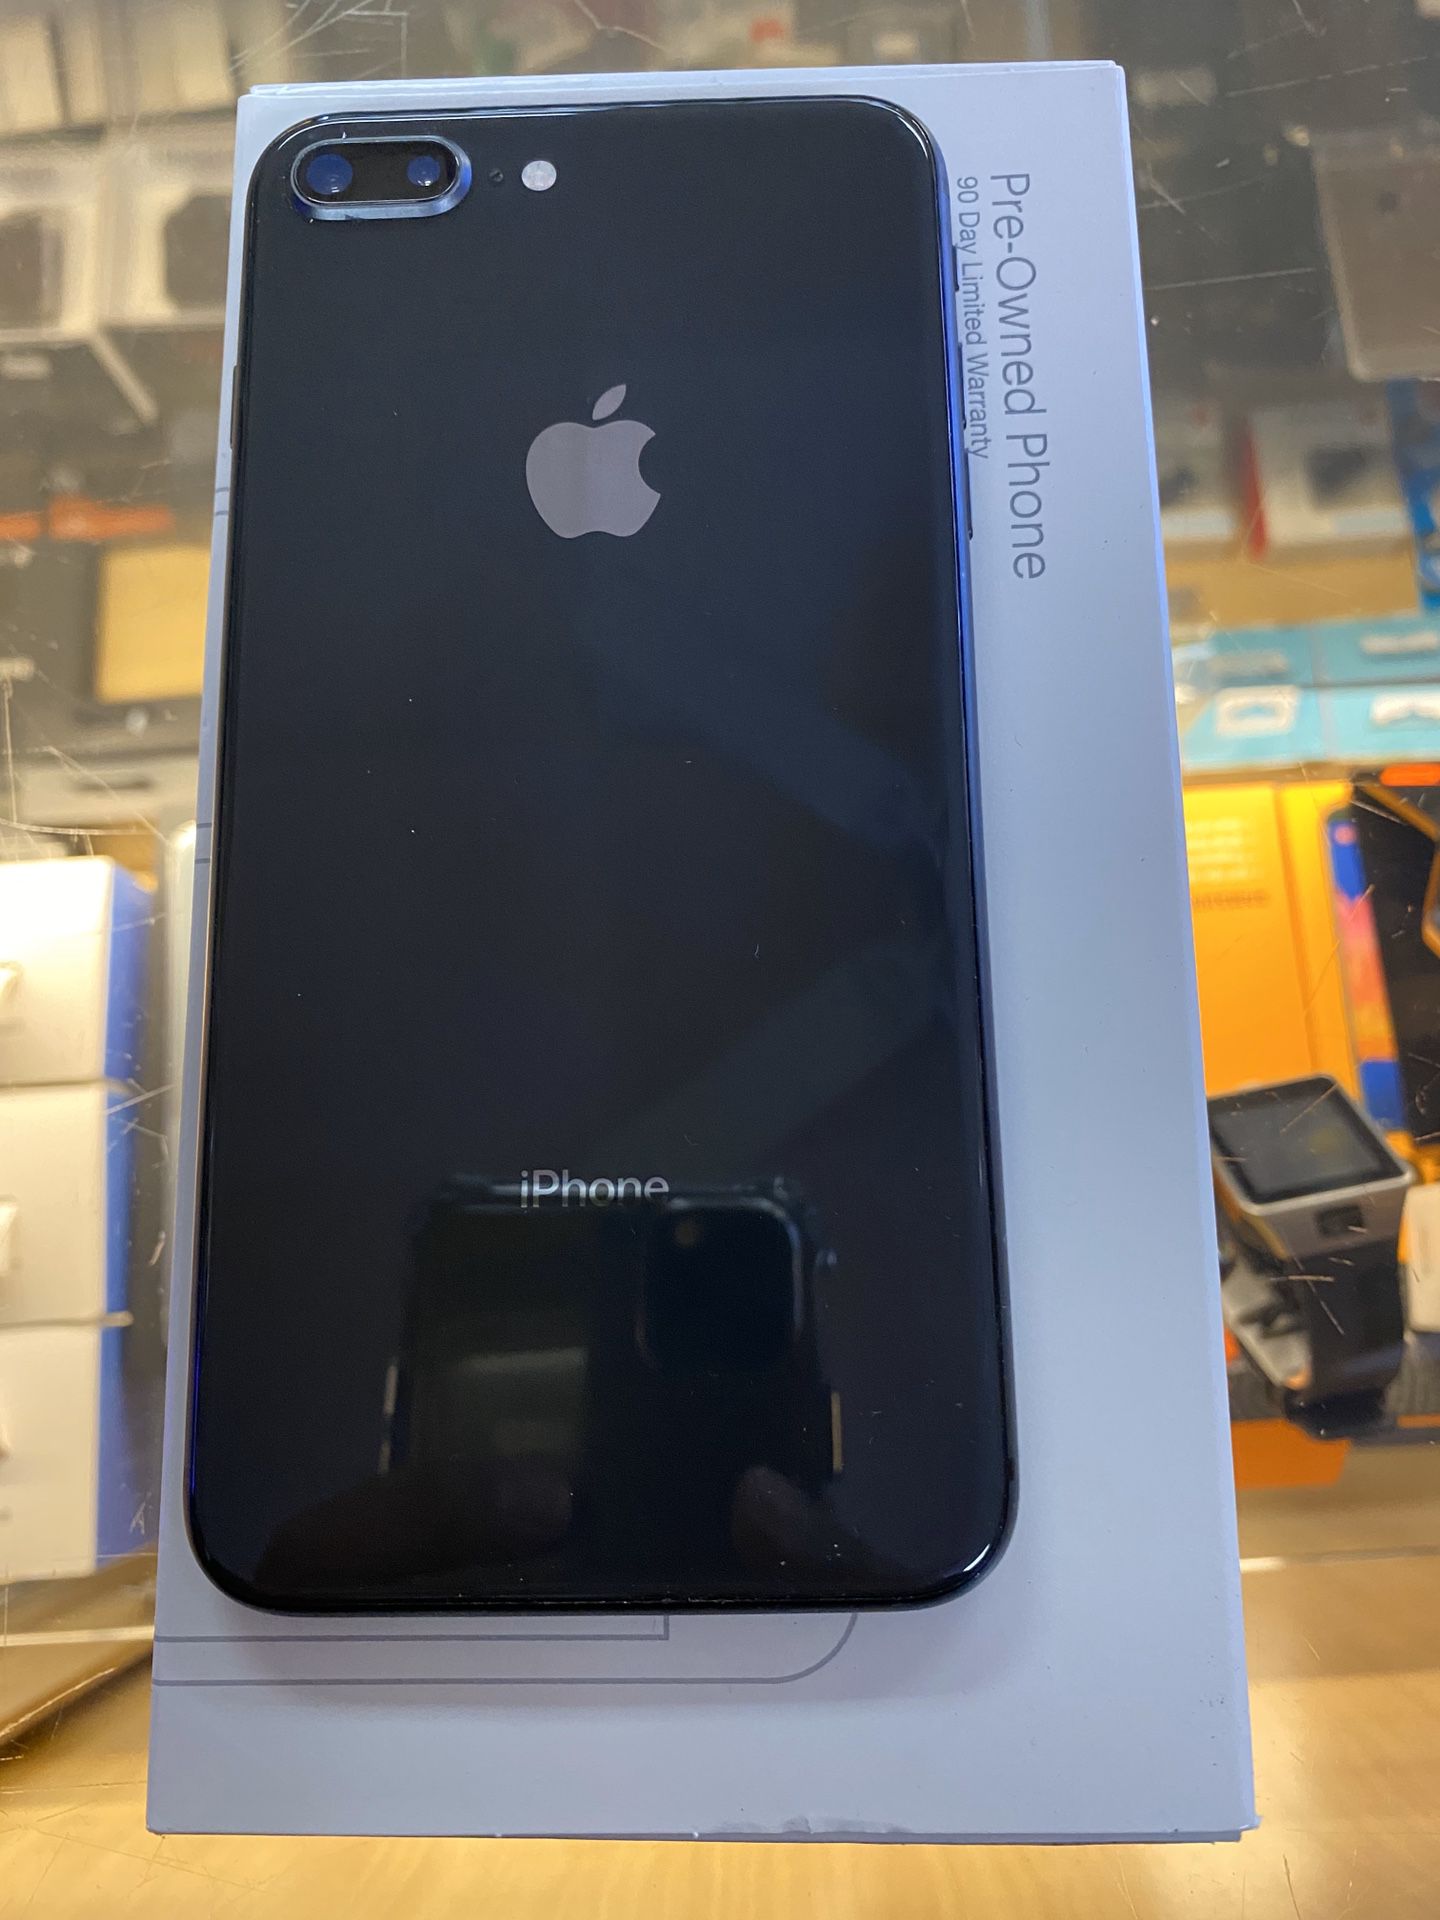 IPHONE 8 Plus pre-owned 64gb (for boost mobile only) NOT UNLOCKED. Only for new boost customers 90 day warranty through boost. Space gray